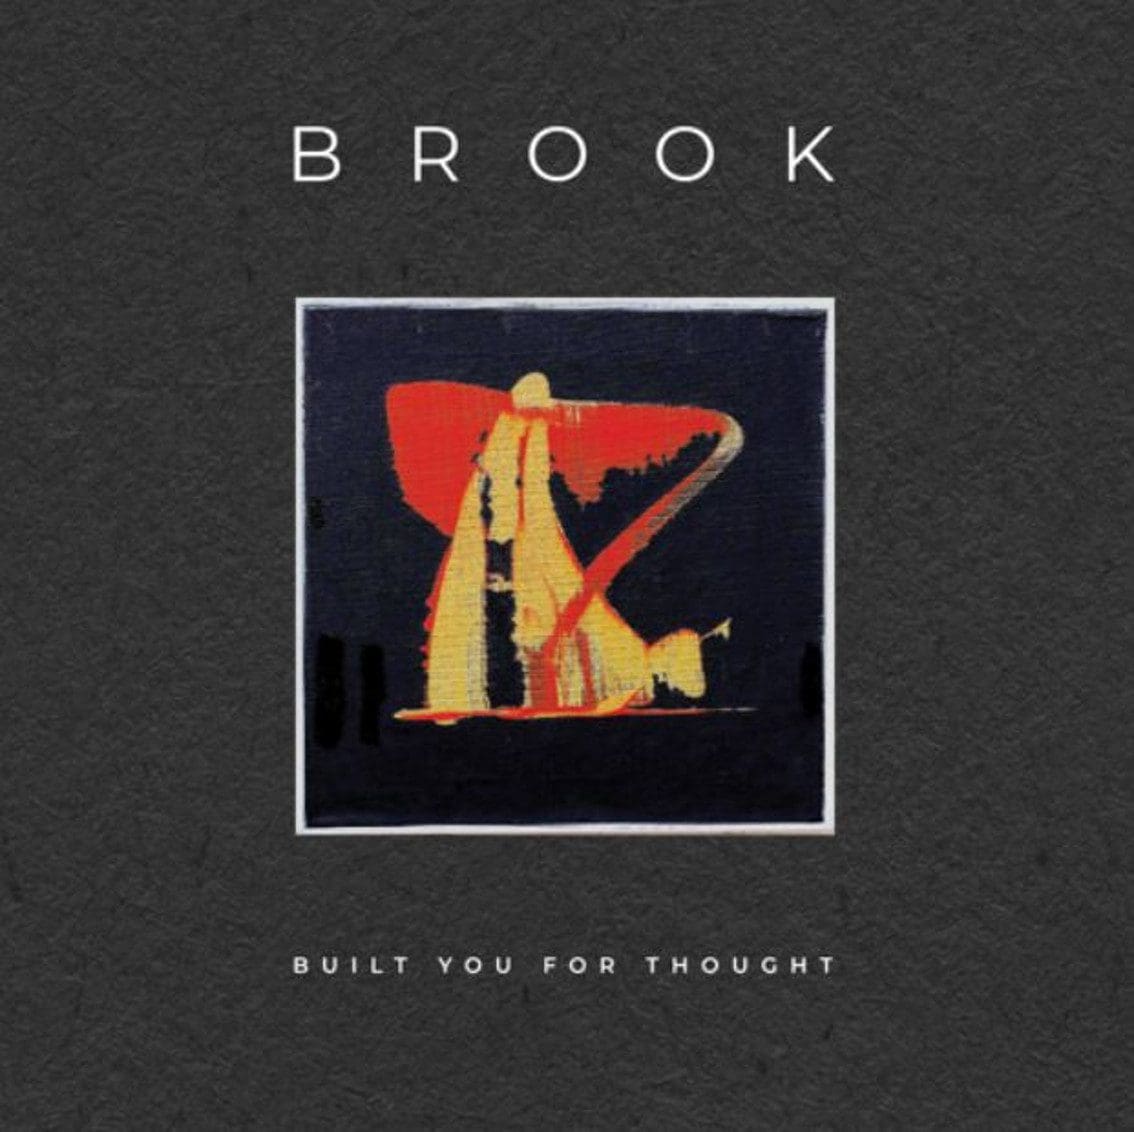 New release from Vince Clarke’s VeryRecords by the UK electronic duo Brook - check out a first video